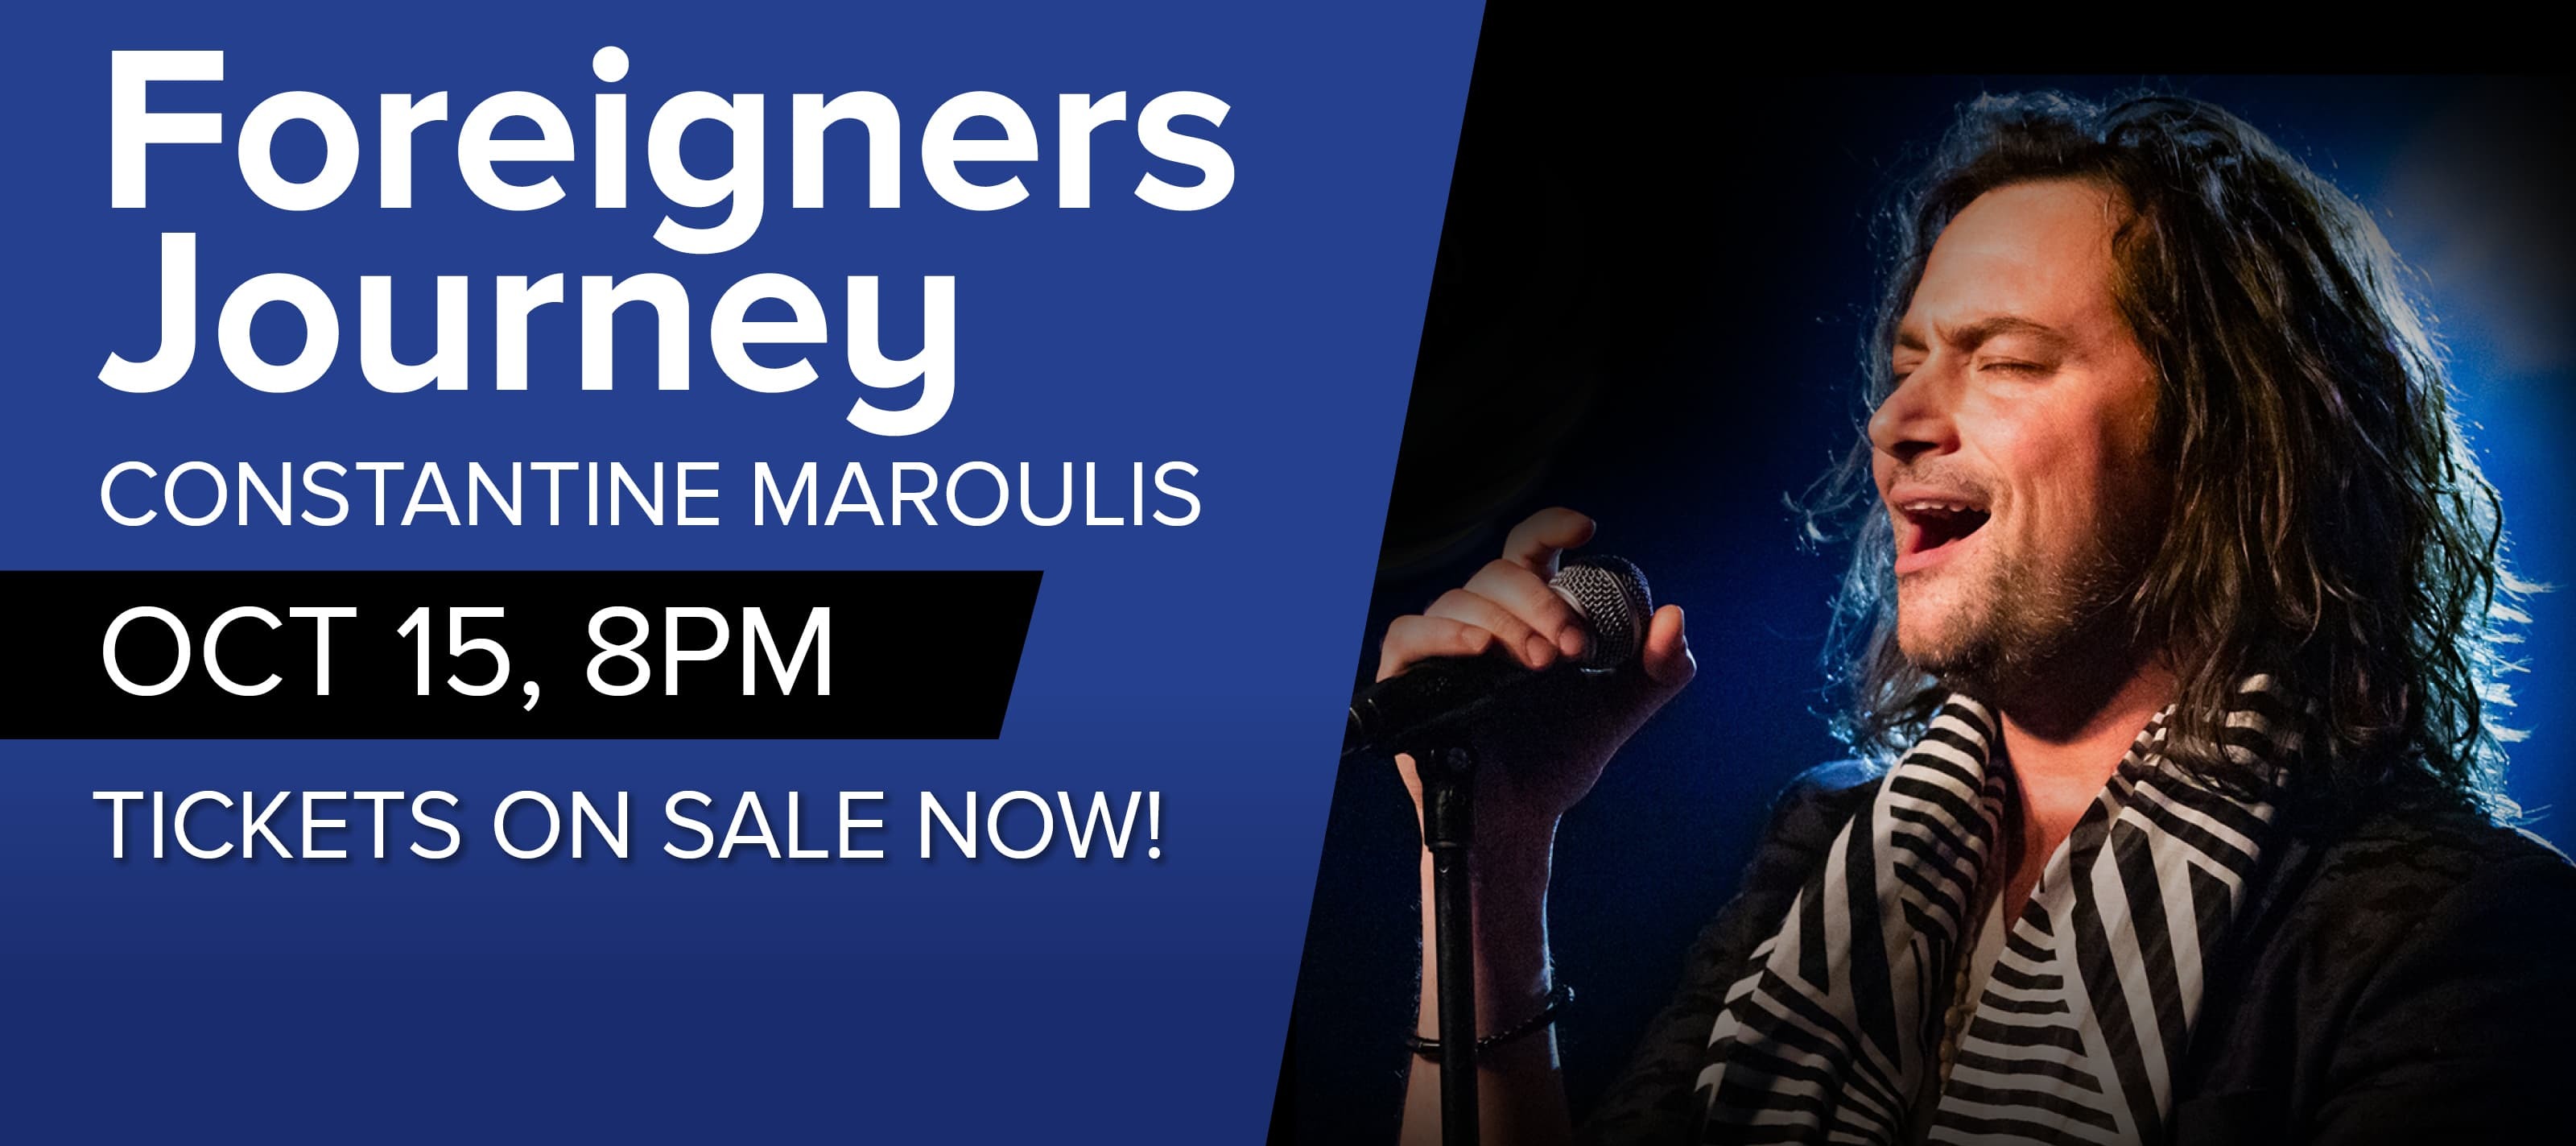 Foreigners Journey Constantine Maroulis Oct 15 8pm tickets on sale now